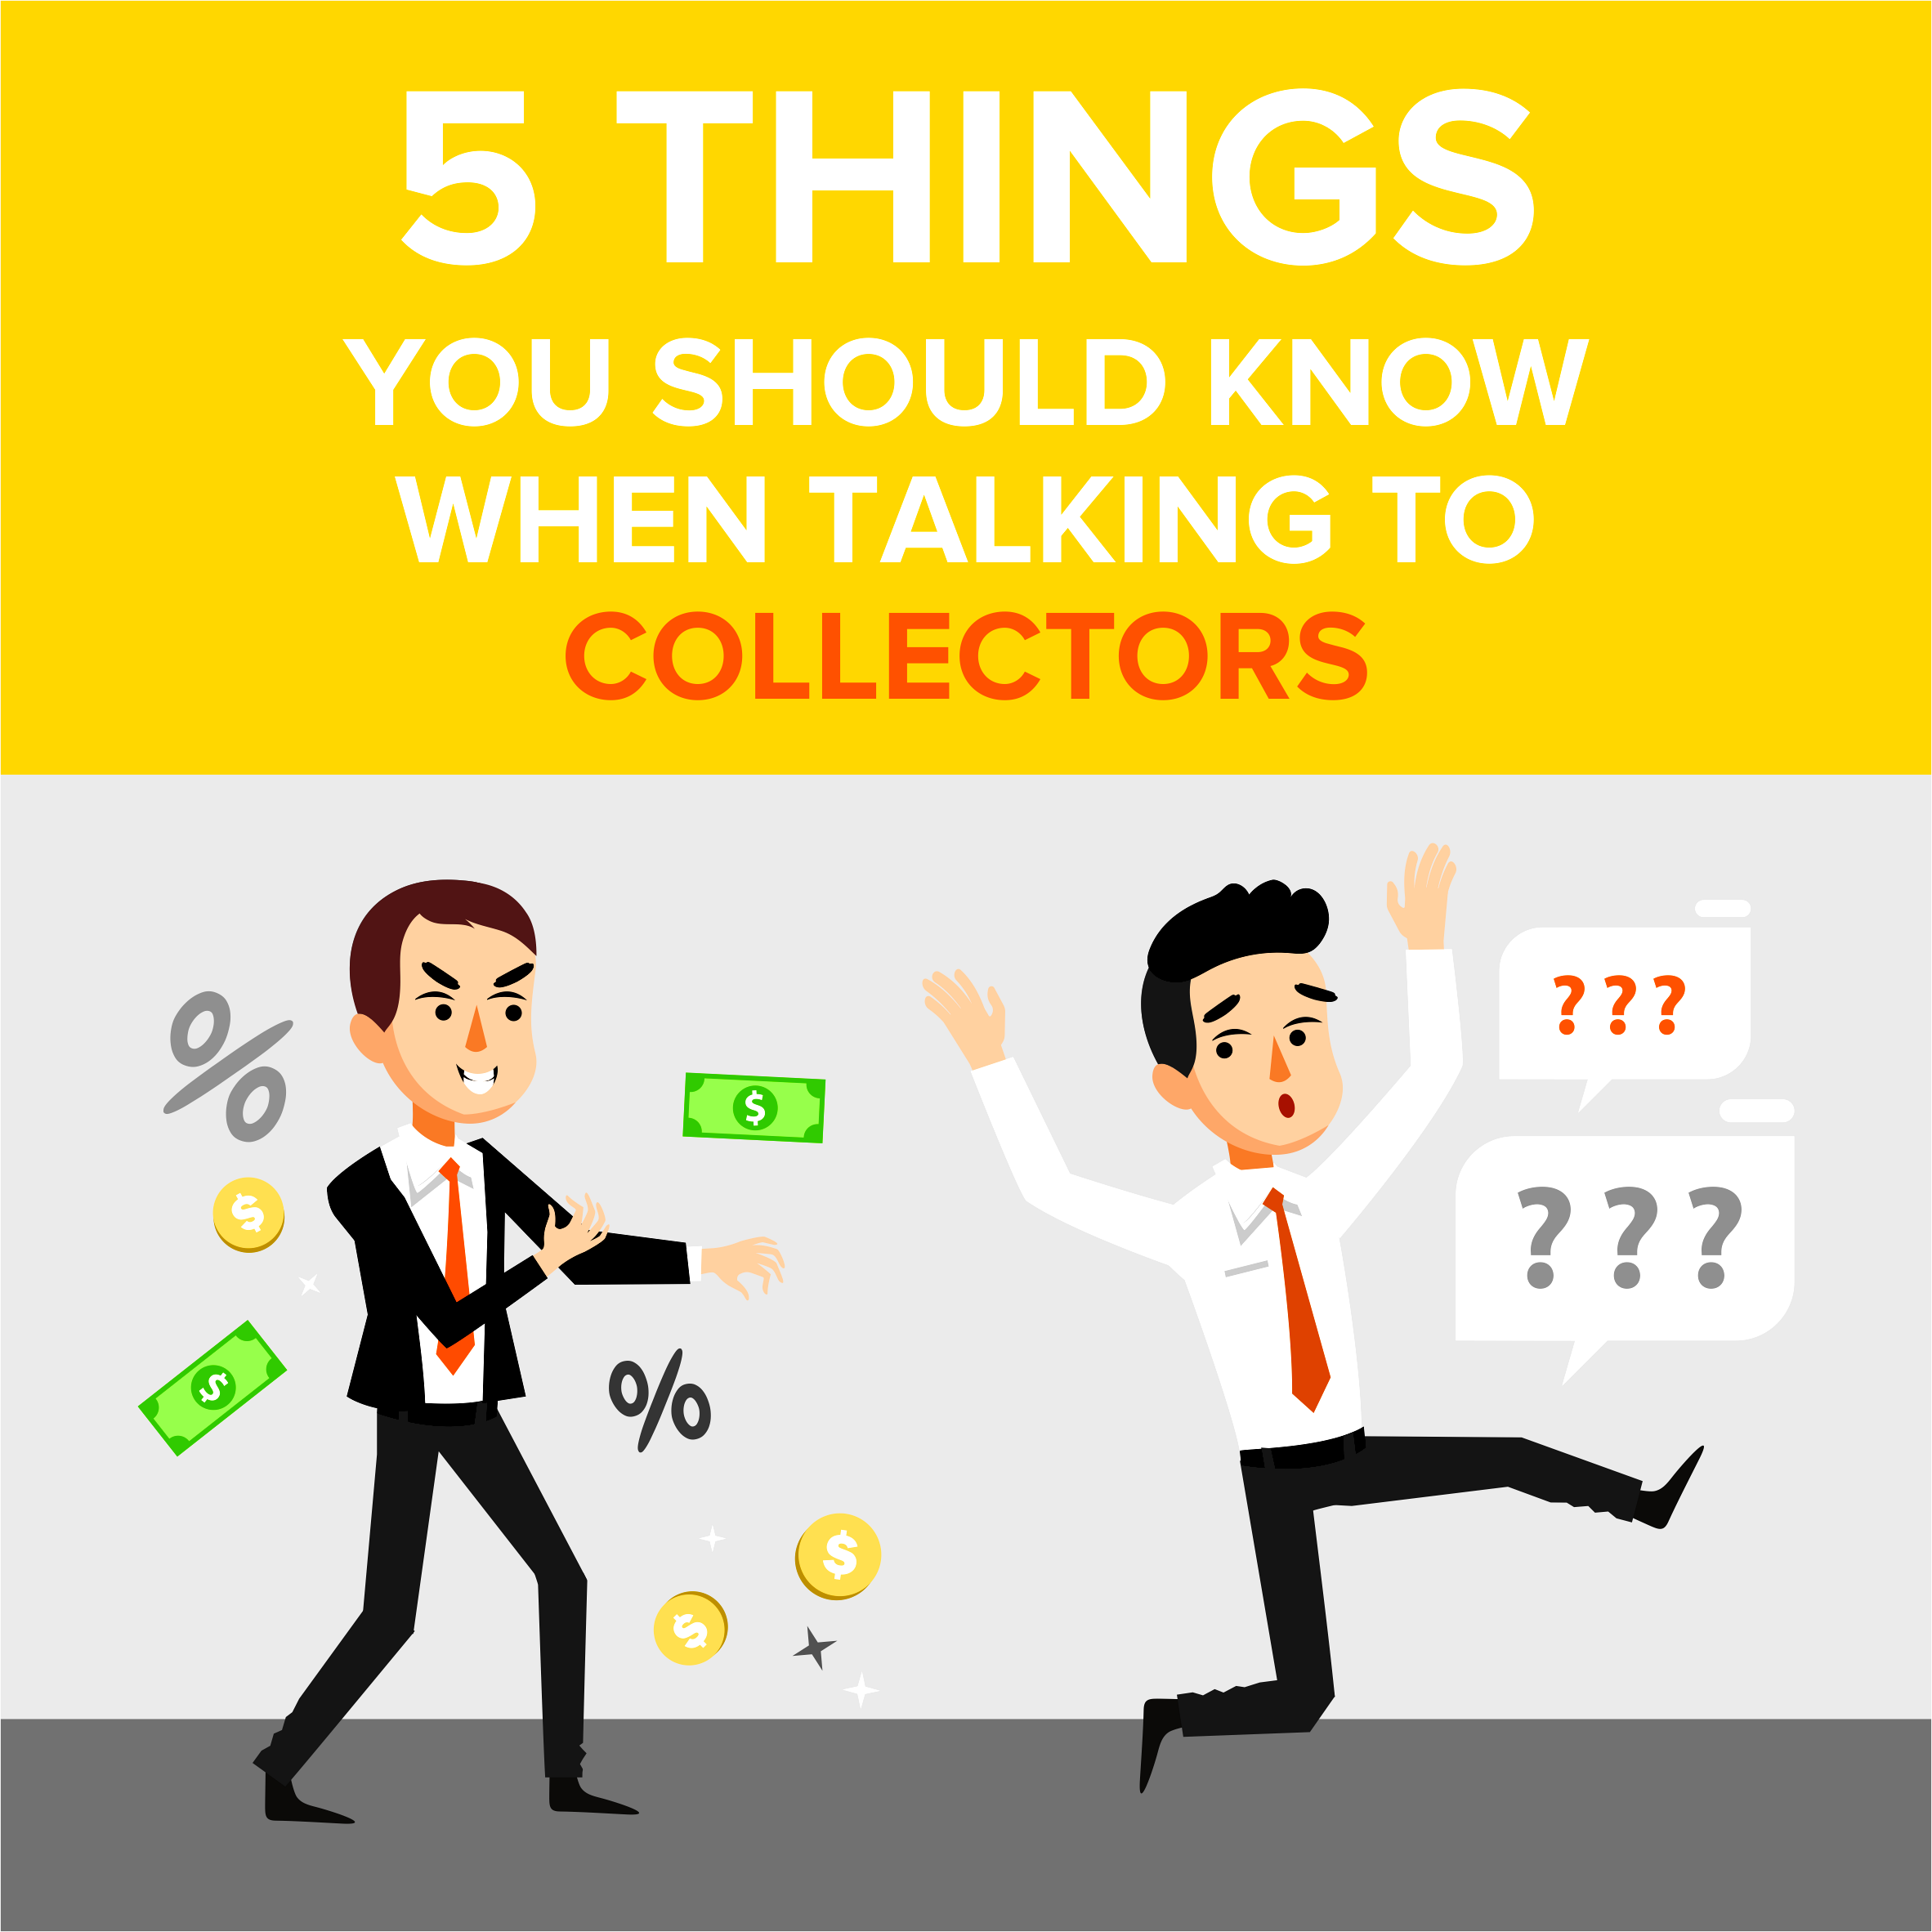 5 Things You Should Know When Talking to Collectors